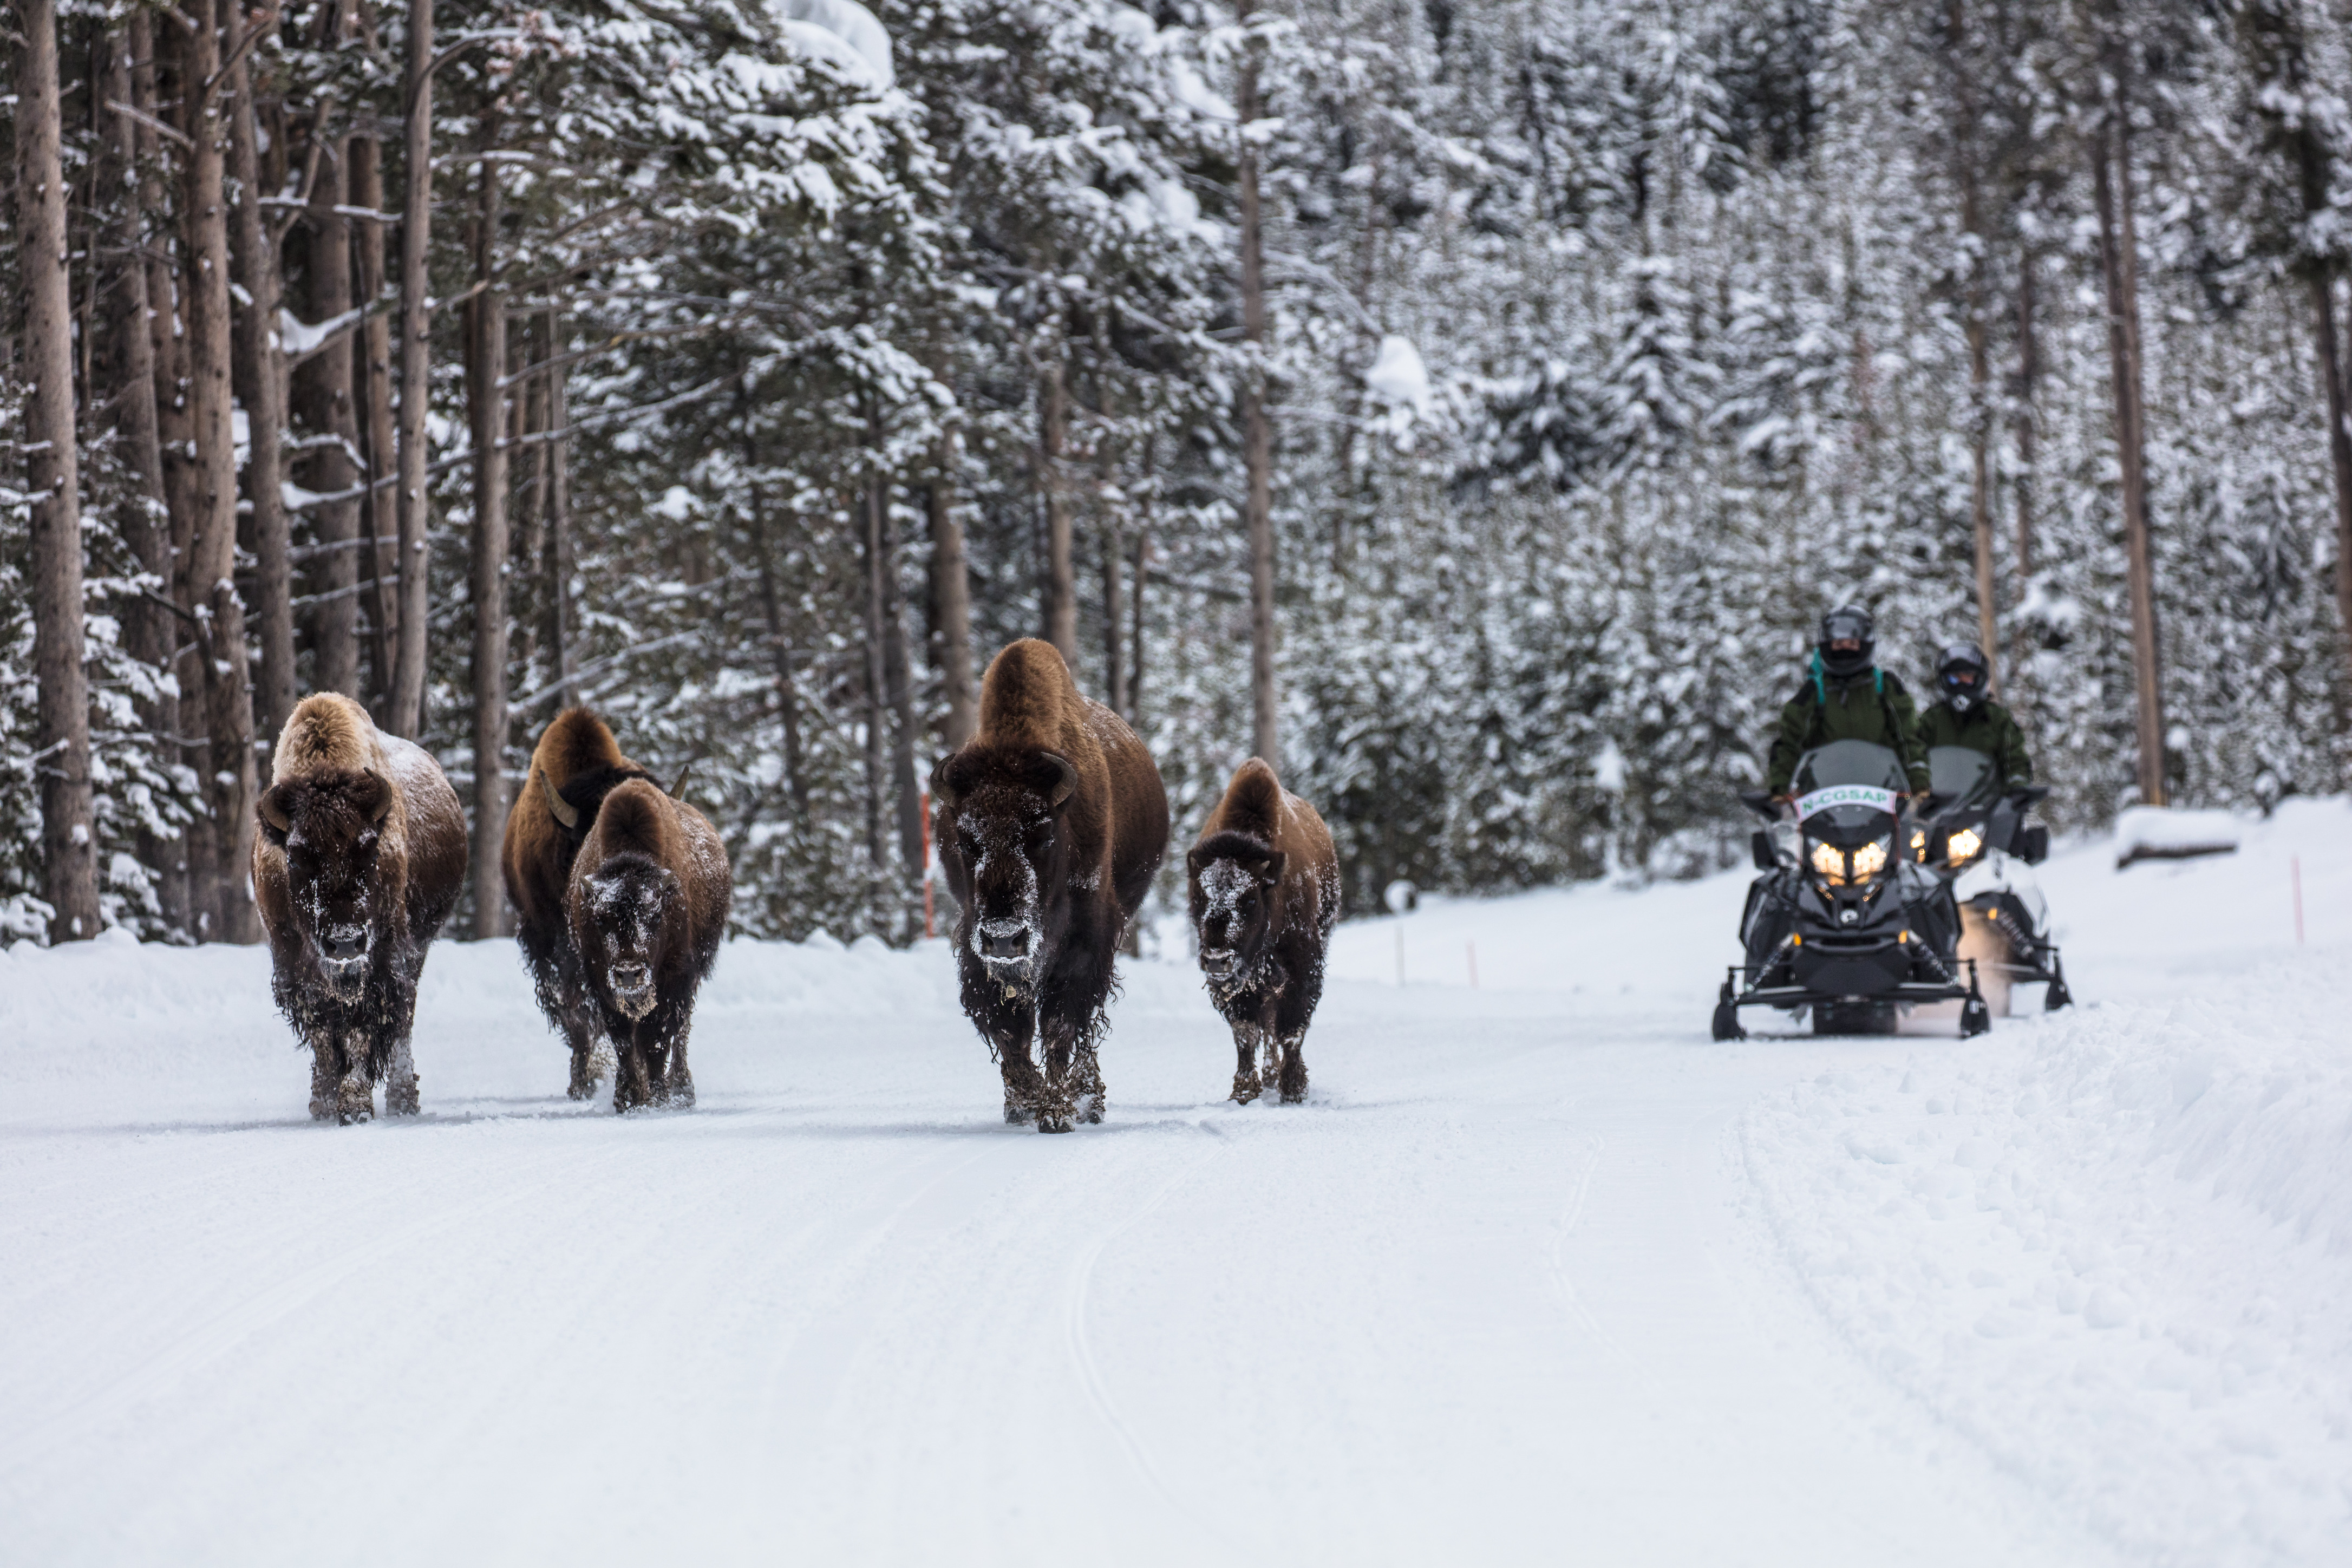 Five bison walking towards the camera with two snowmobiles behind them.